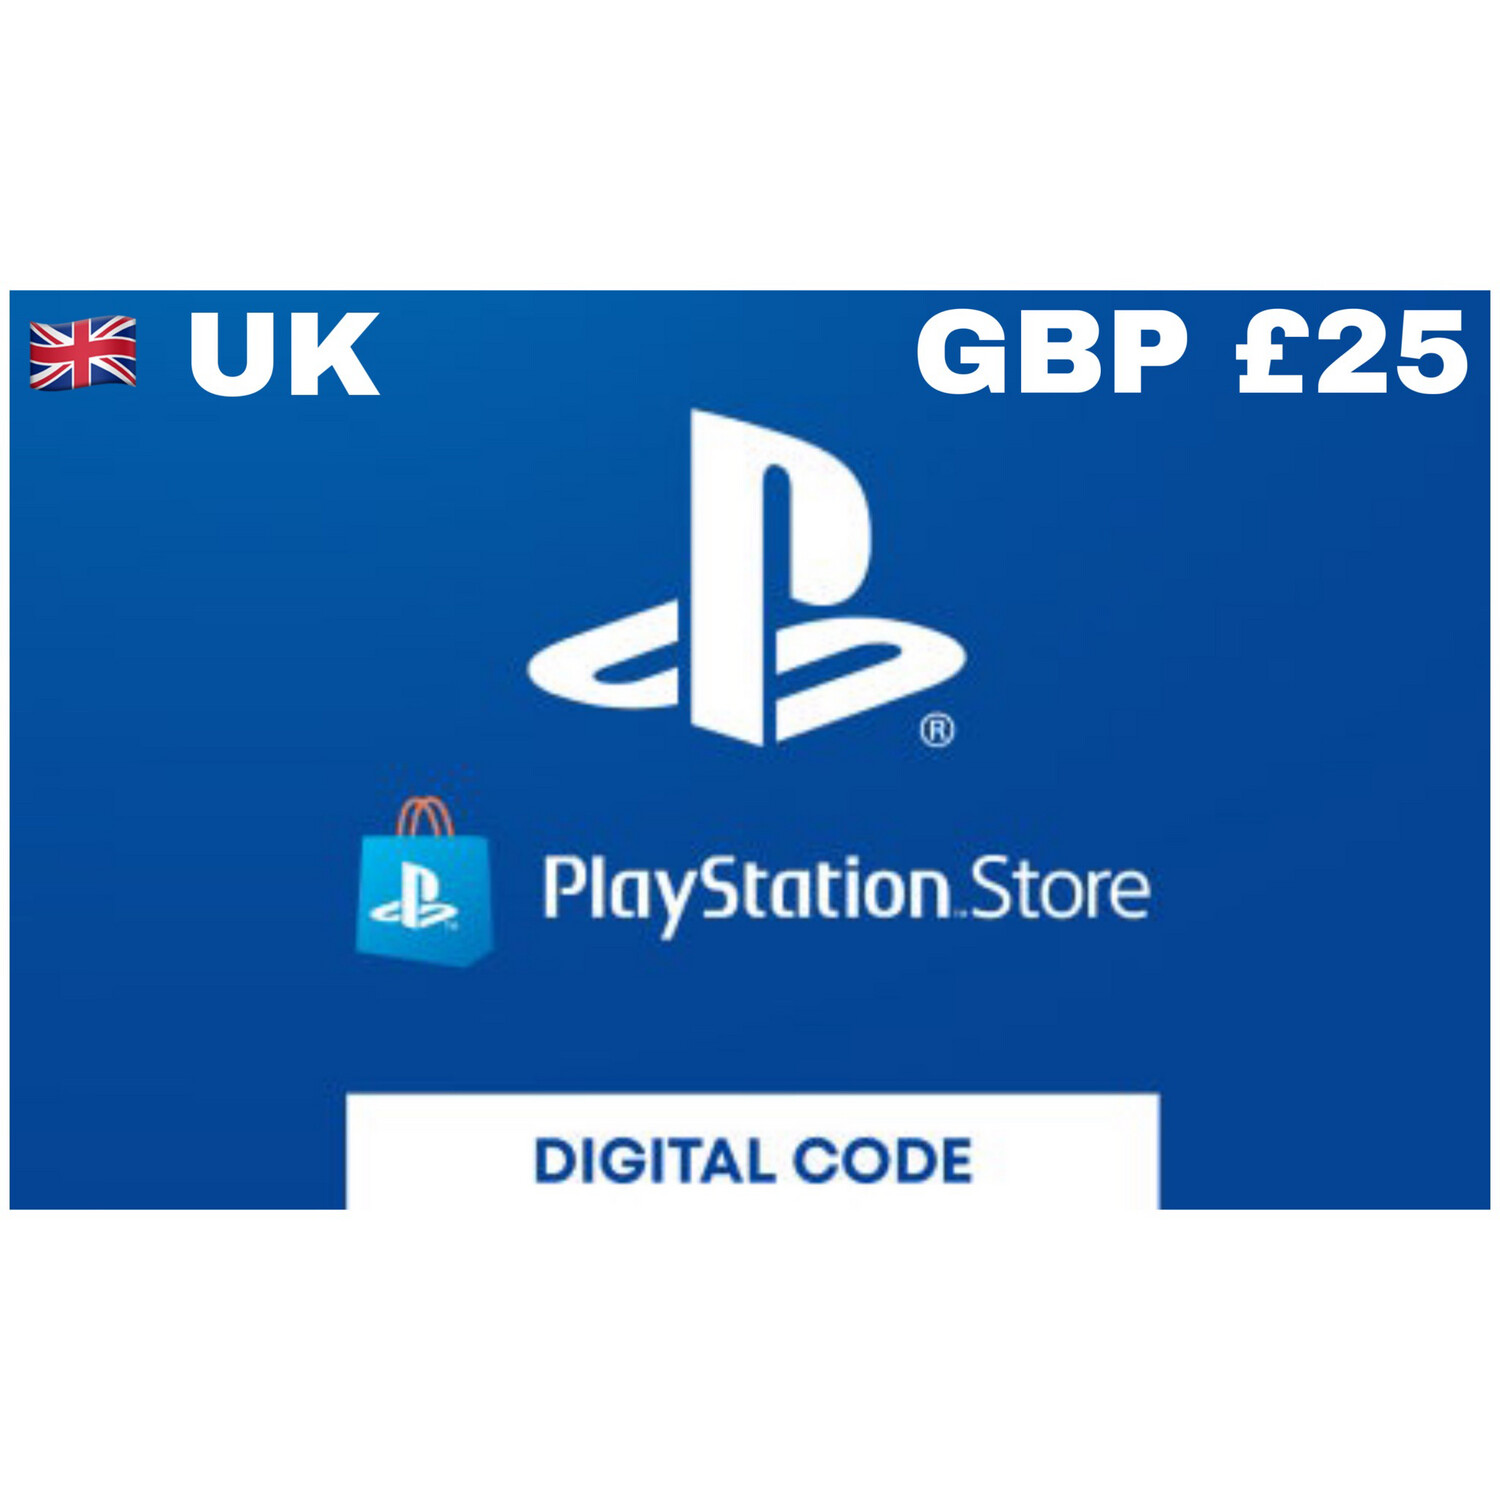 Playstation Store Gift Card UK GBP £25